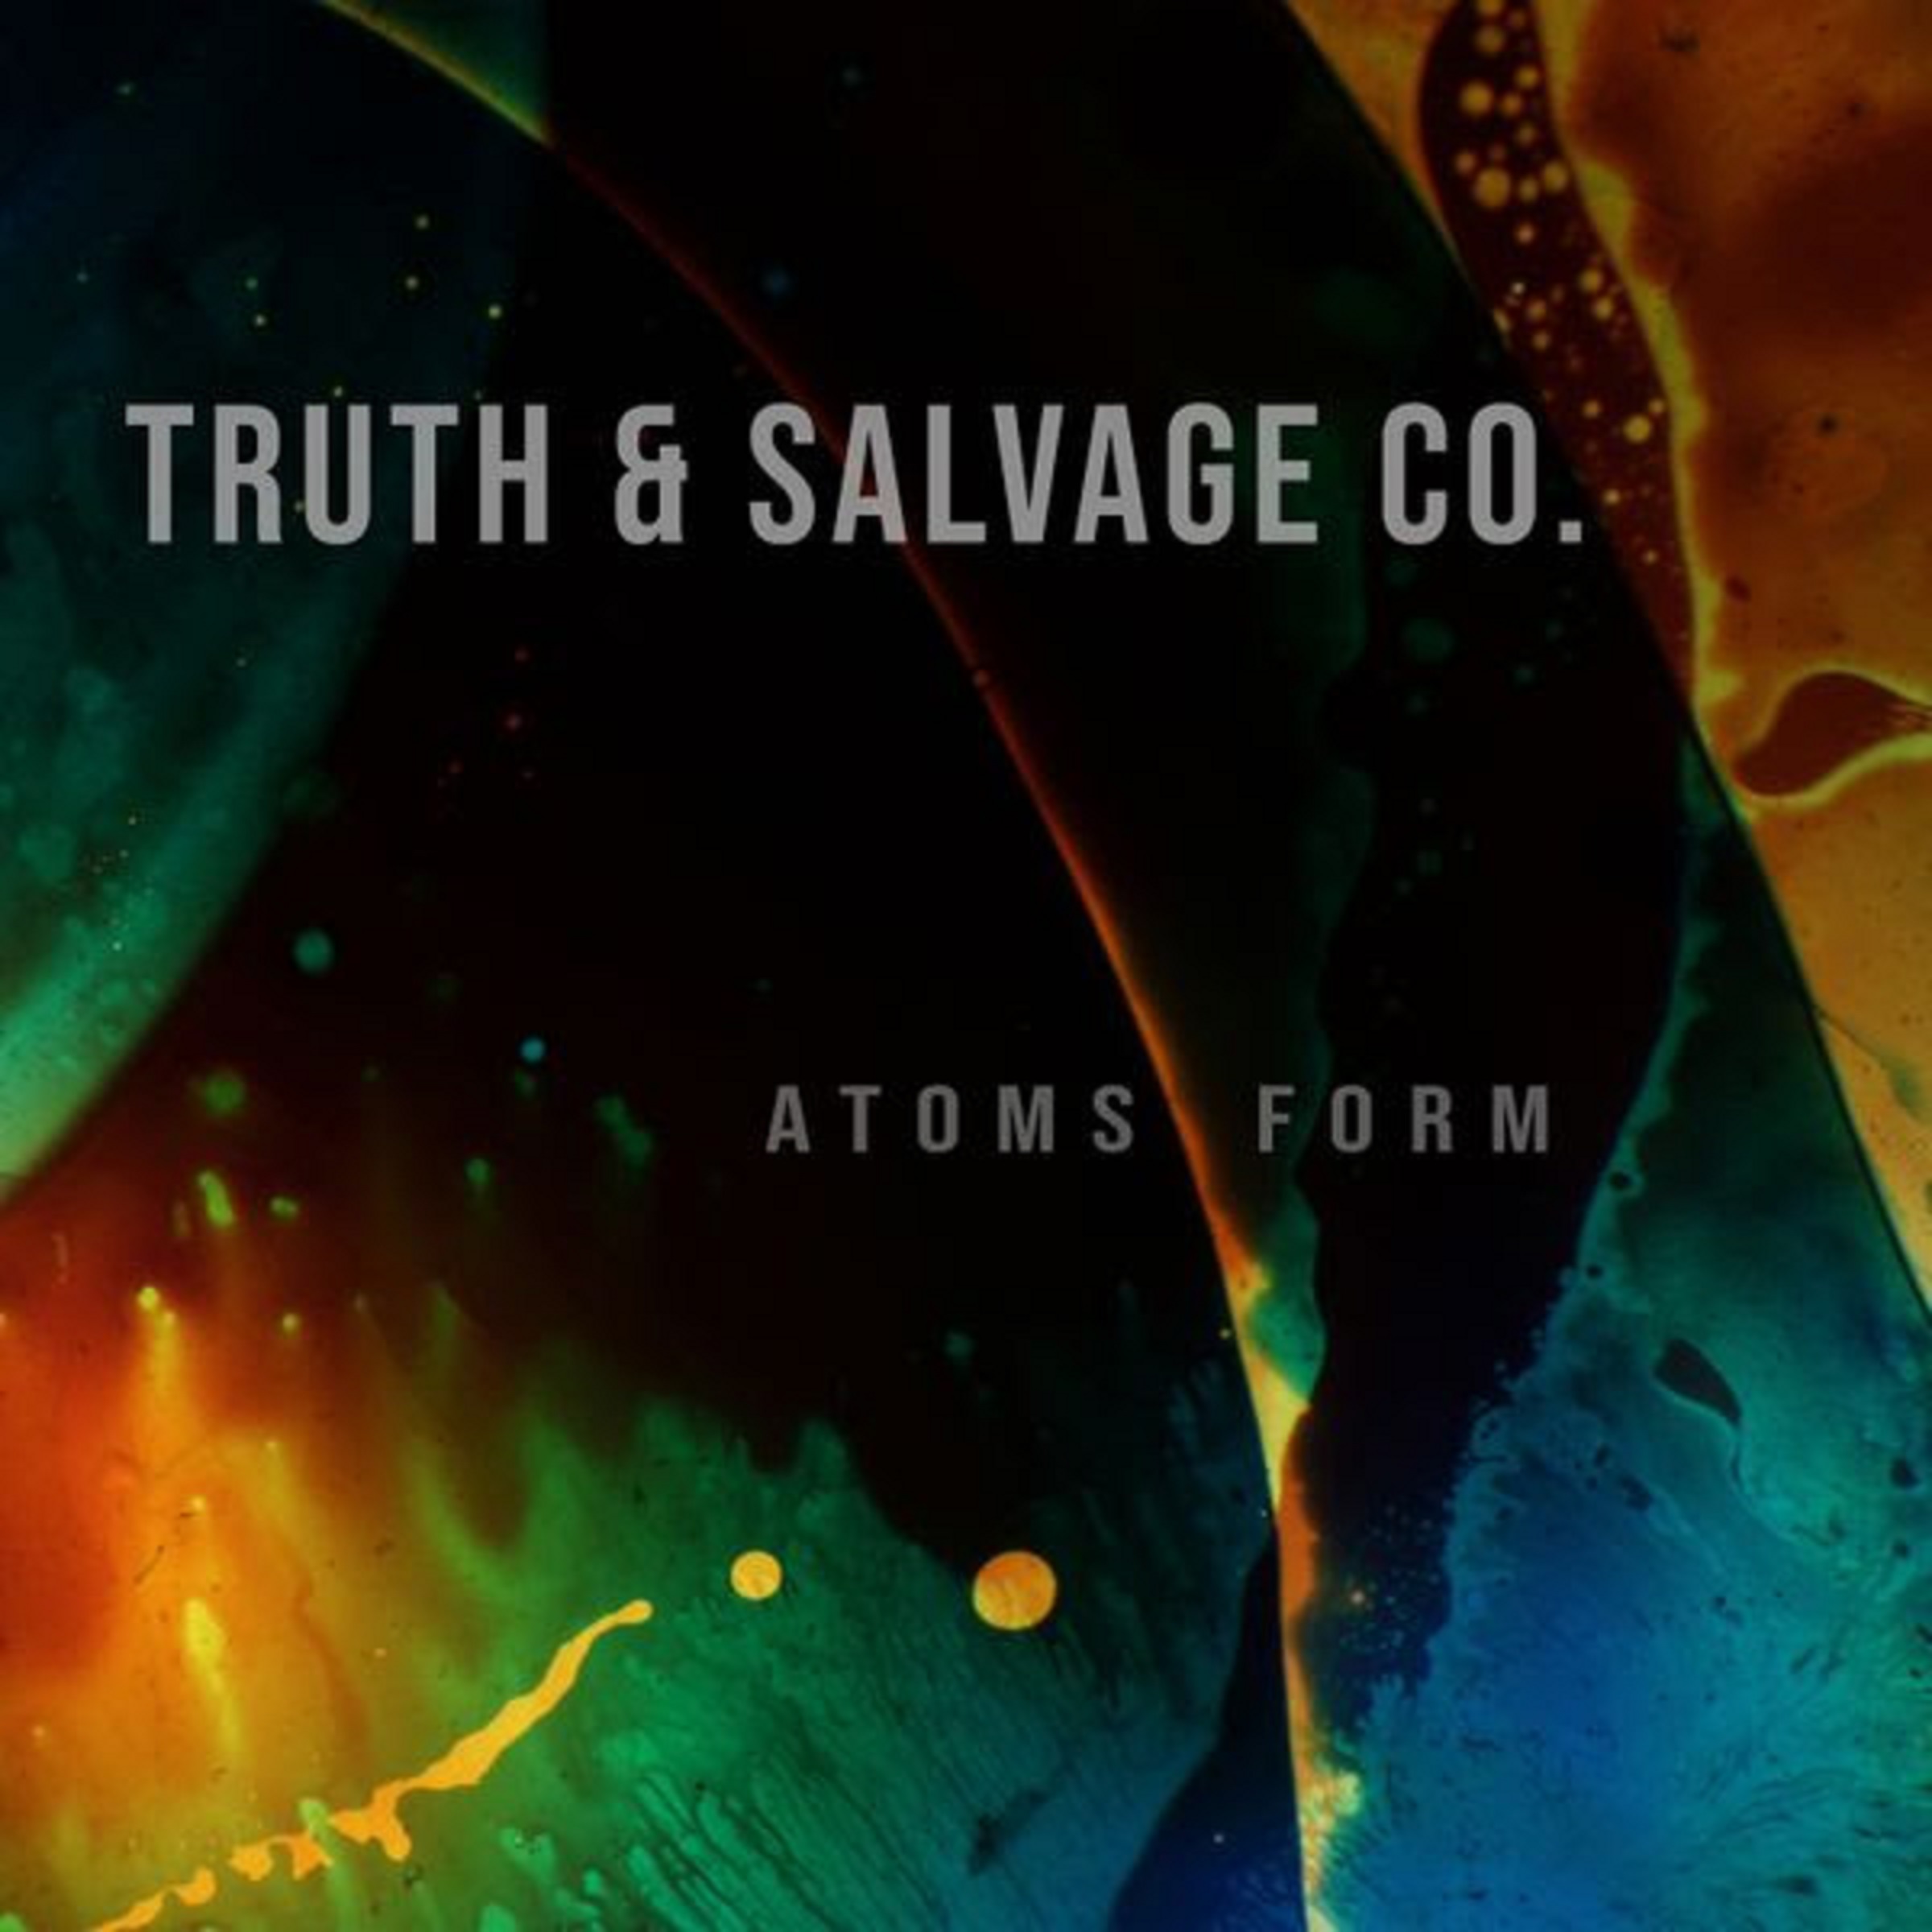 Truth & Salvage Co. Announce a New Album, 'Atoms Form' and Two Dates in New Orleans!